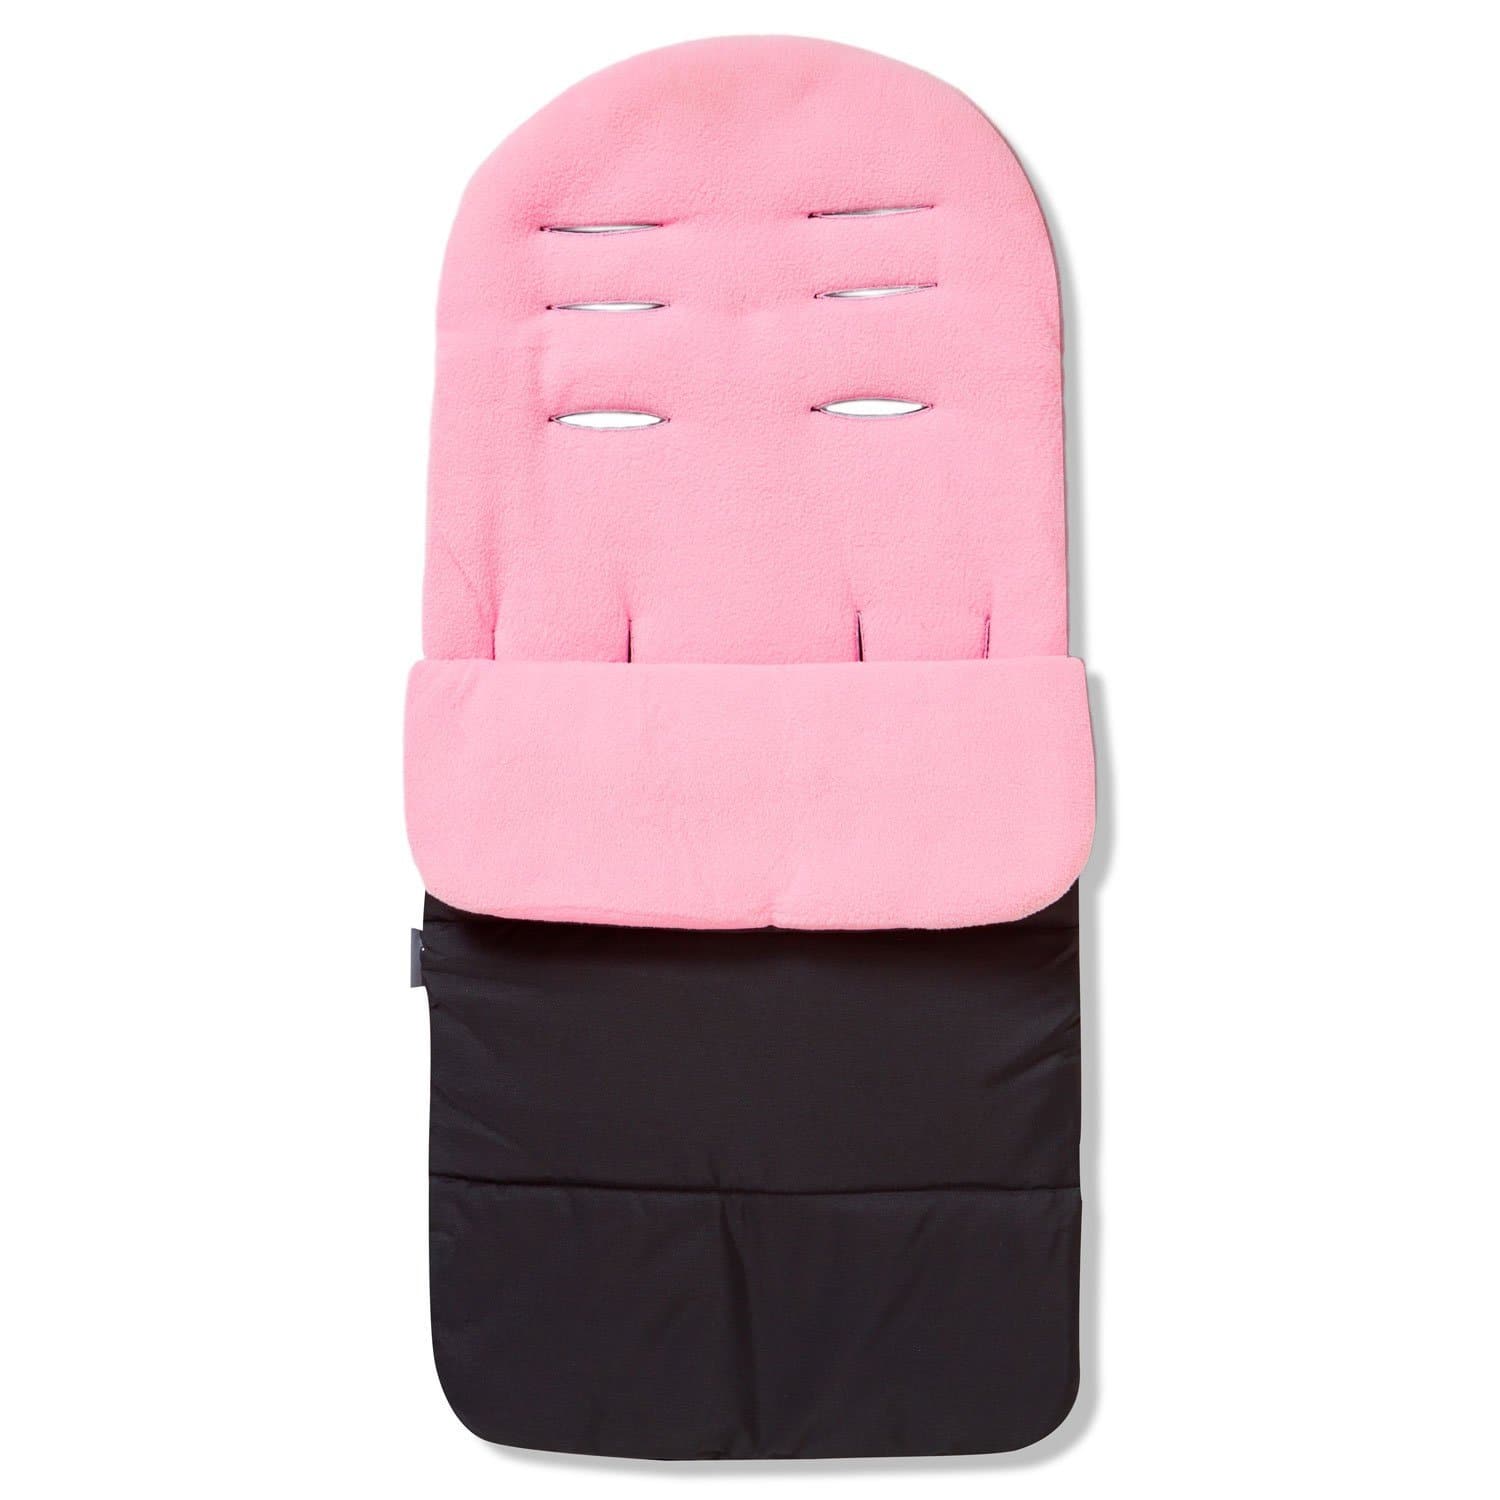 Premium Footmuff / Cosy Toes Compatible with Phil & Teds - Candy Pink / Fits All Models | For Your Little One